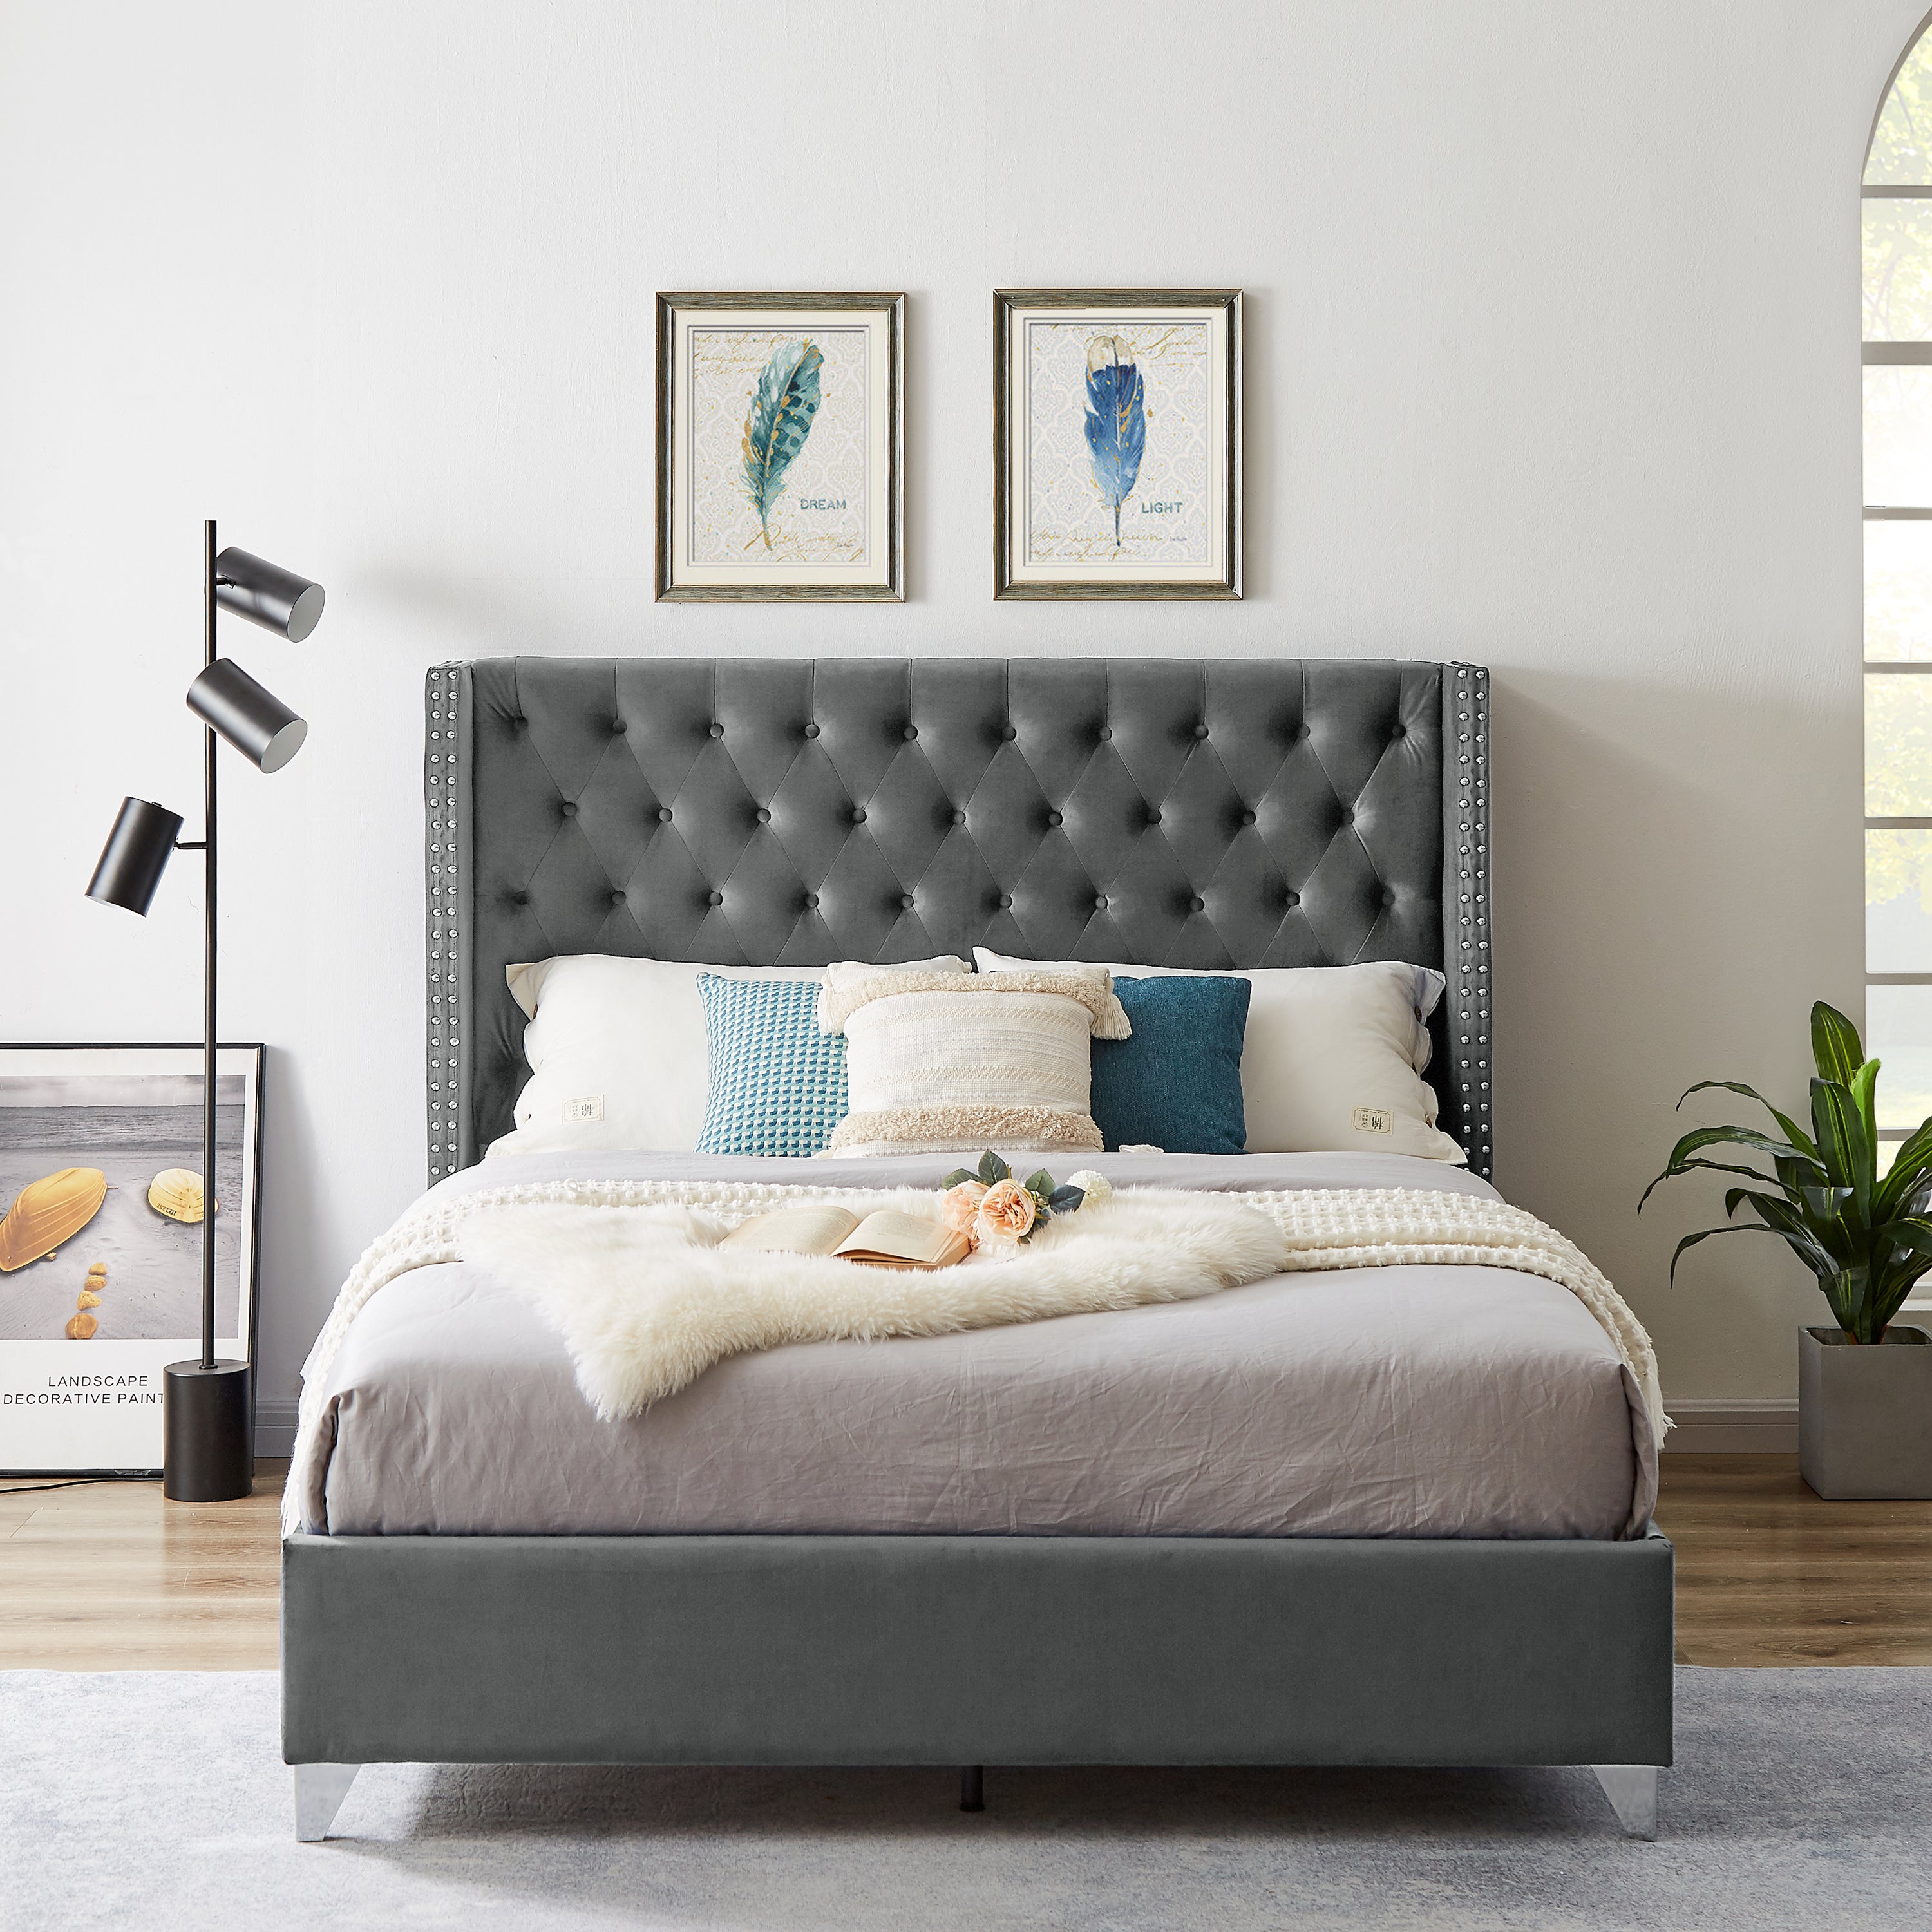 Upholstered Queen Headboard Bed with Wooden Slats By: Alabama Beds